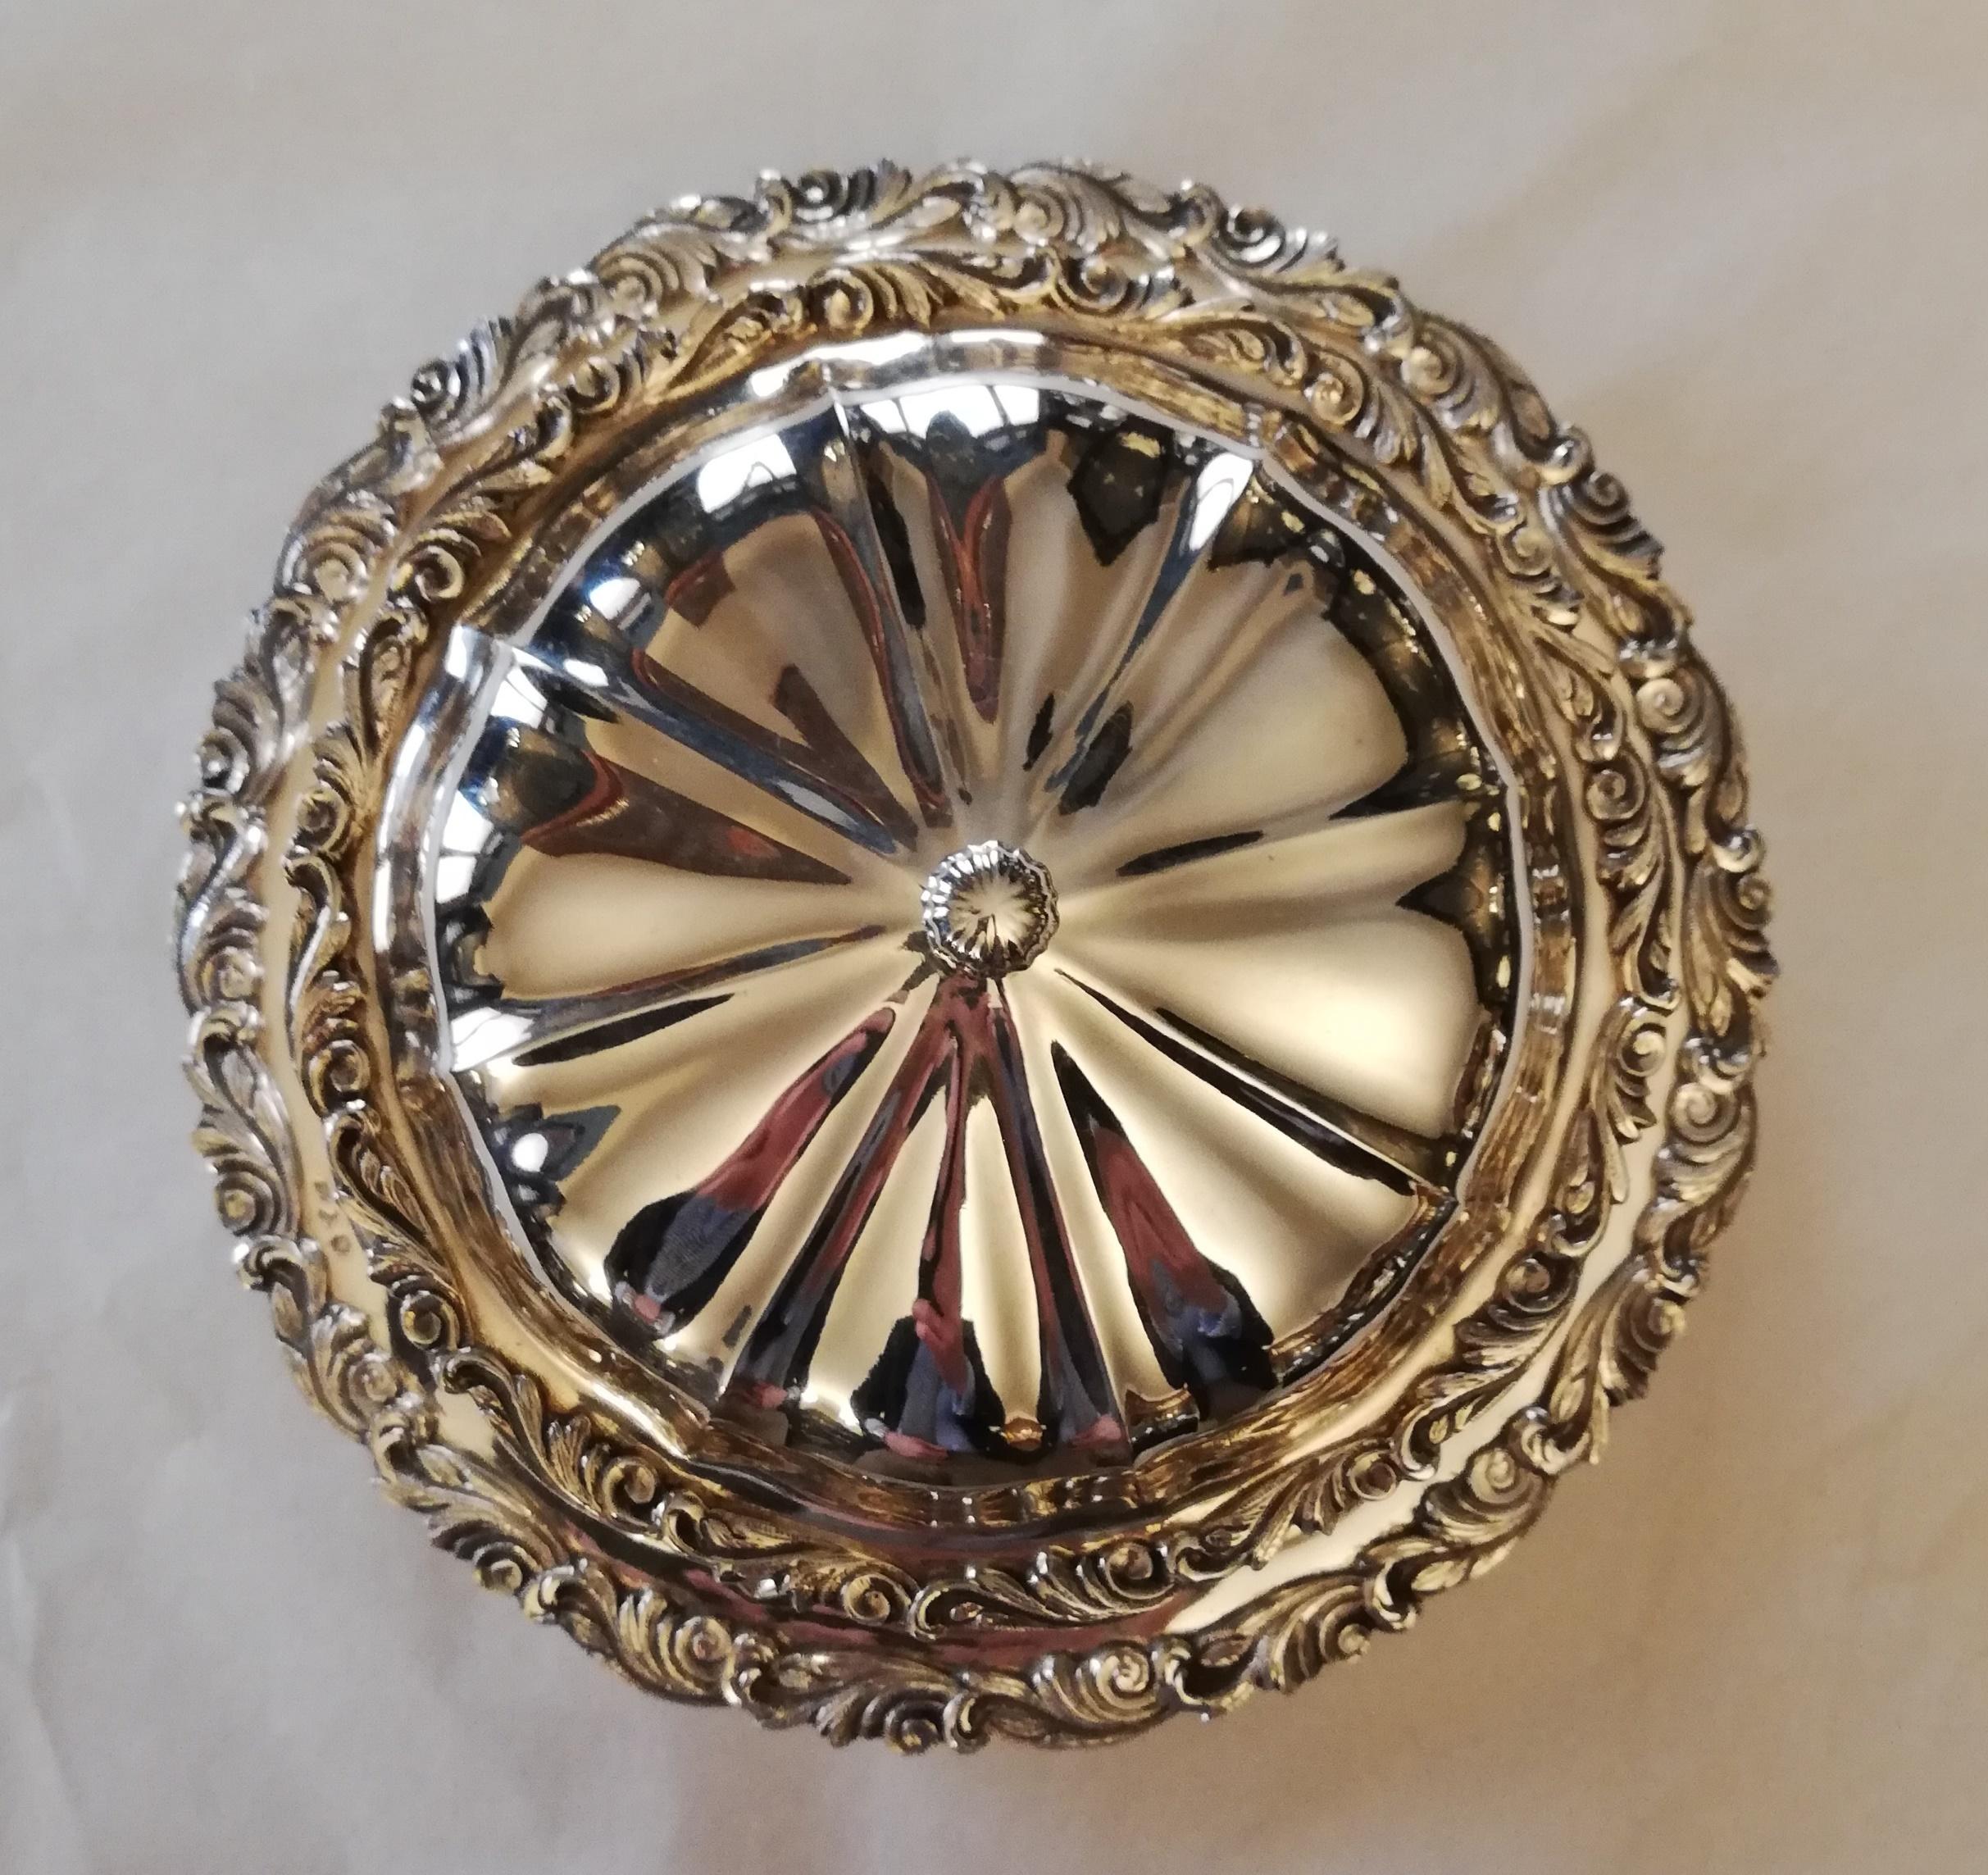 A hand forged sterling Caviar dish made in Austria. Produced in the first half of the 20th century. It consits of 4 parts which could be used individually as well (a lay-plate, a bowl with the in-lay for the caviar and the lid). You can put soem